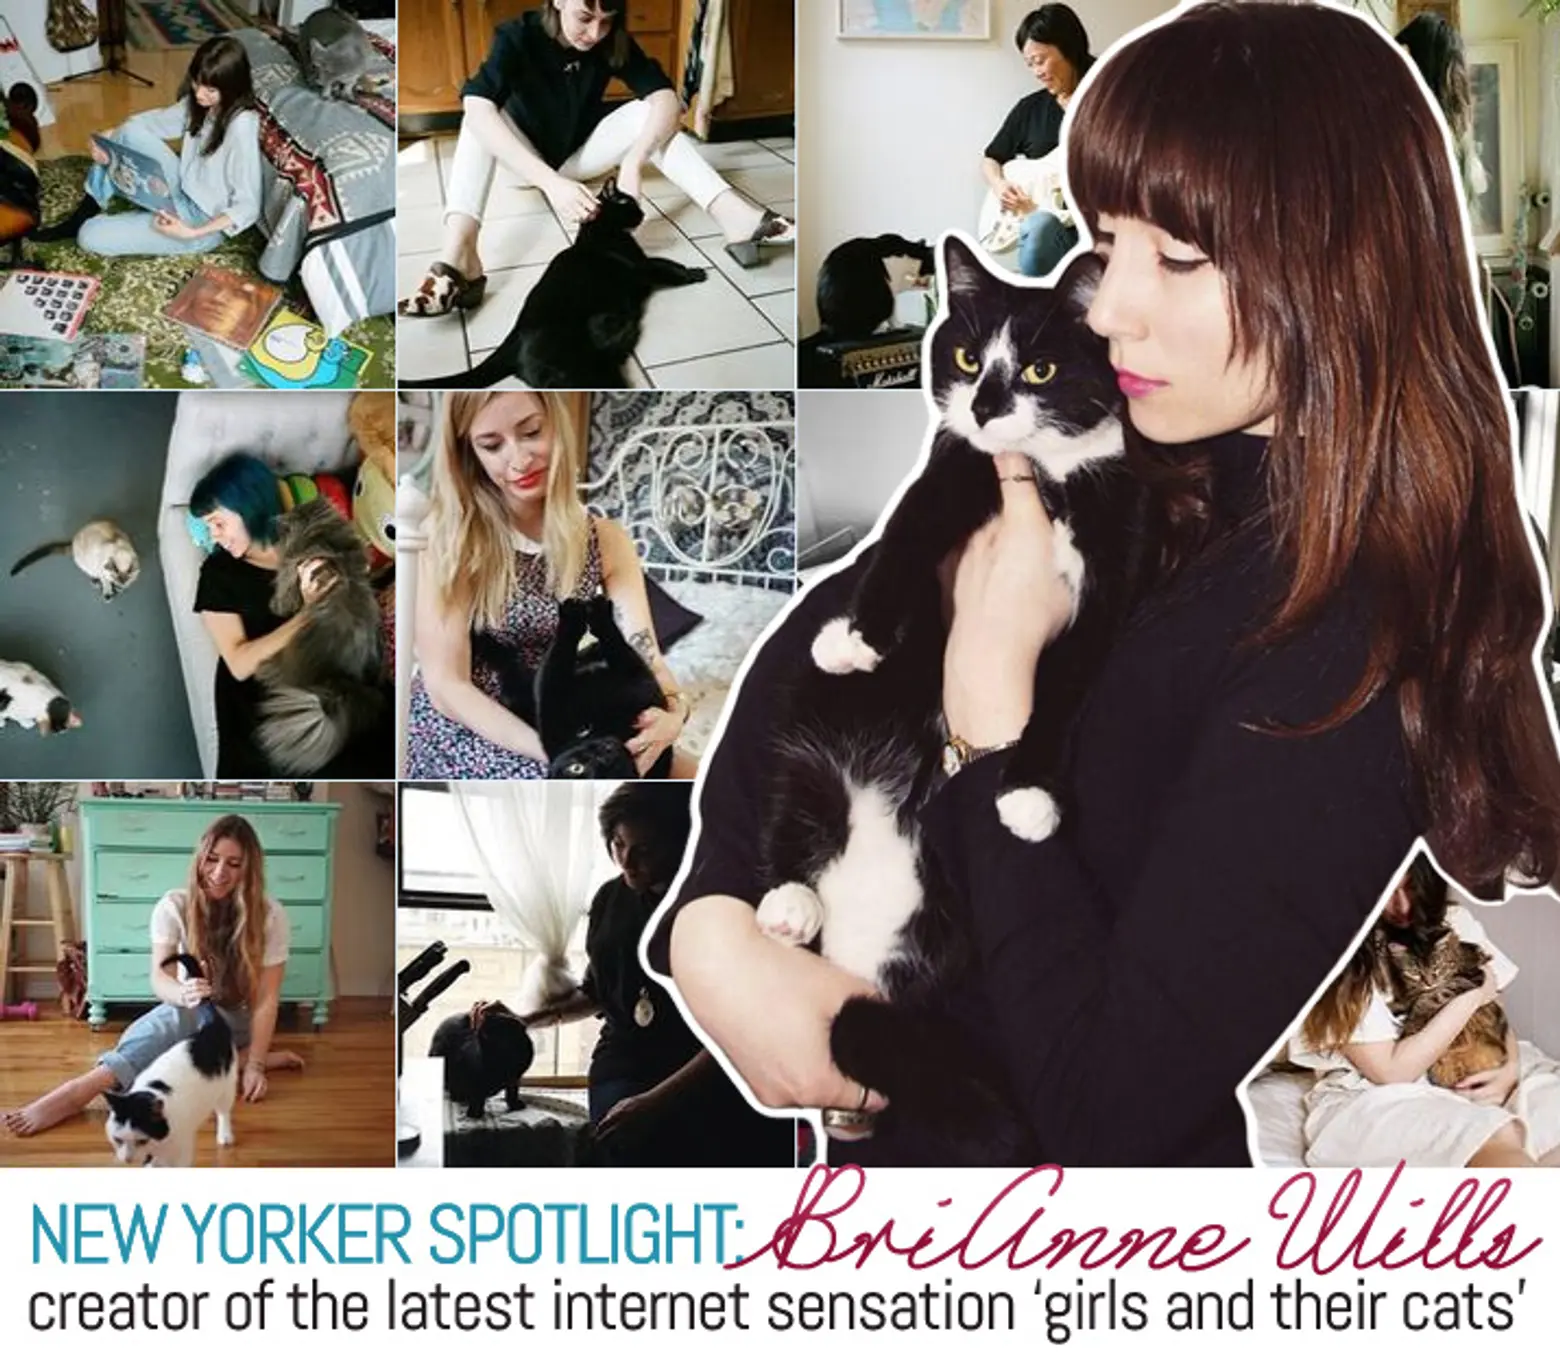 New Yorker Spotlight: BriAnne Wills, Creator of the Latest Internet Sensation ‘Girls and Their Cats’